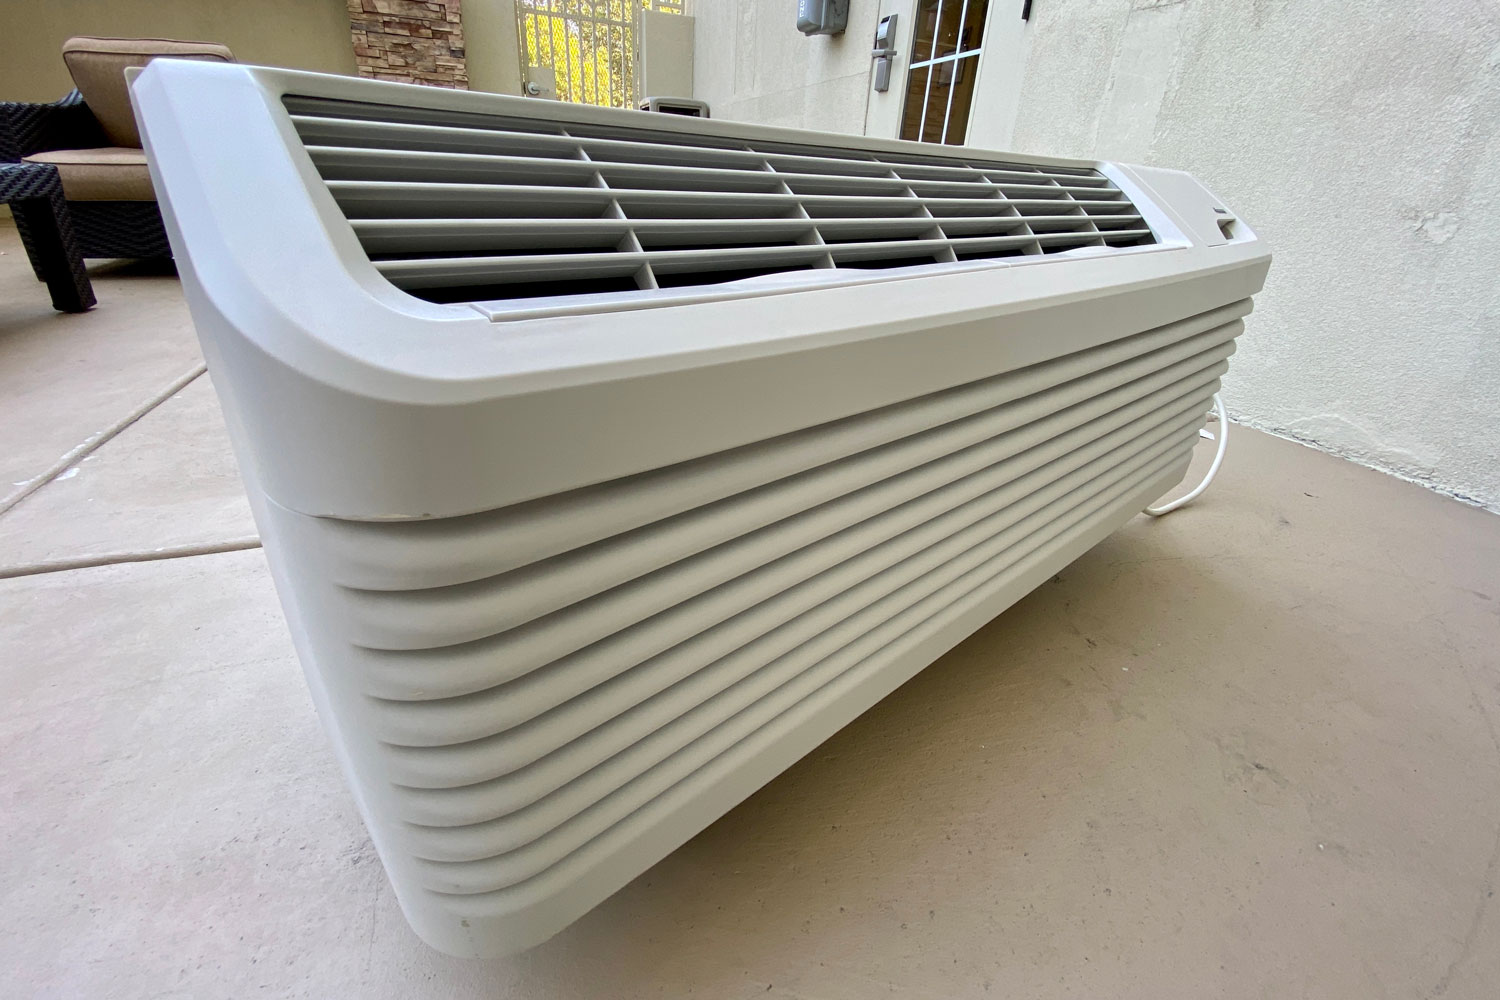 A white portable AC unit inside the living room